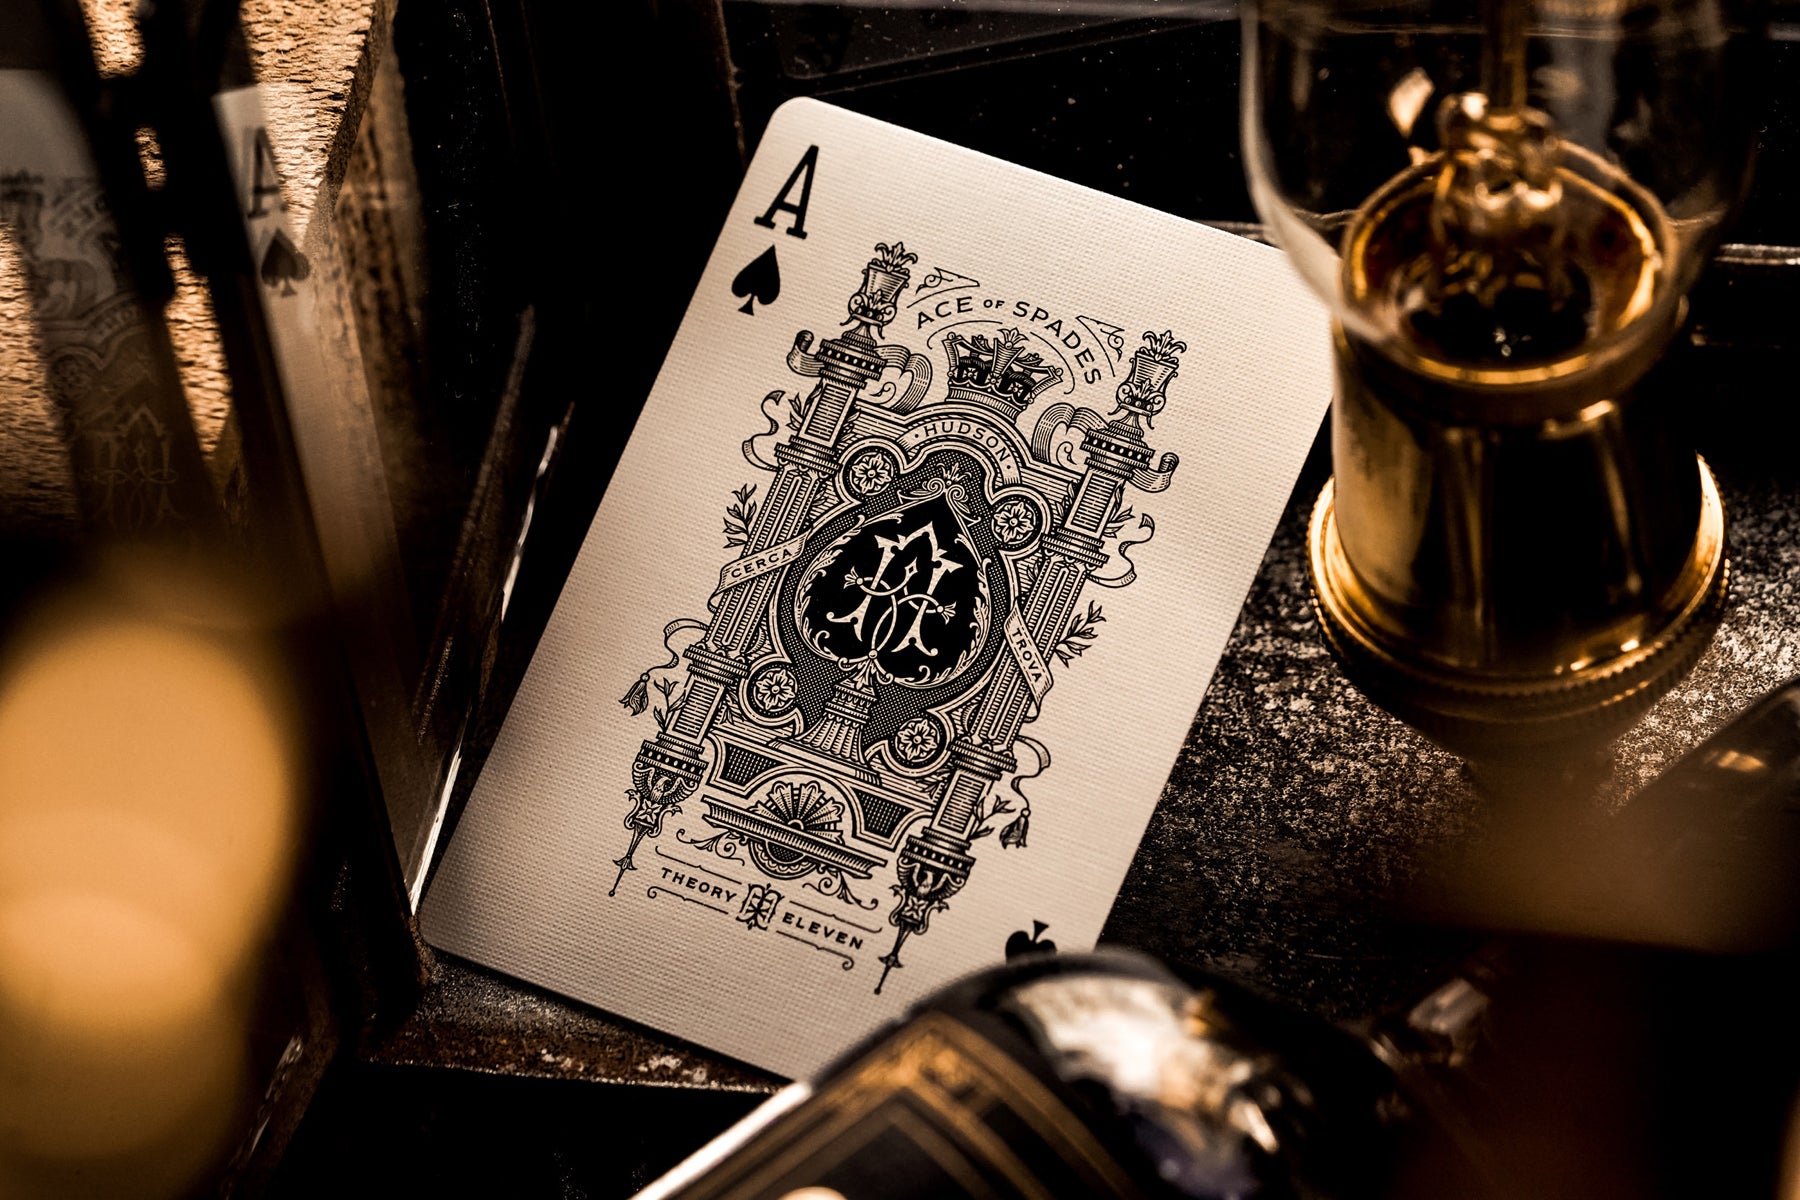 Close up photograph of Theory11 ace of spade playing card from the "Hudson" deck.